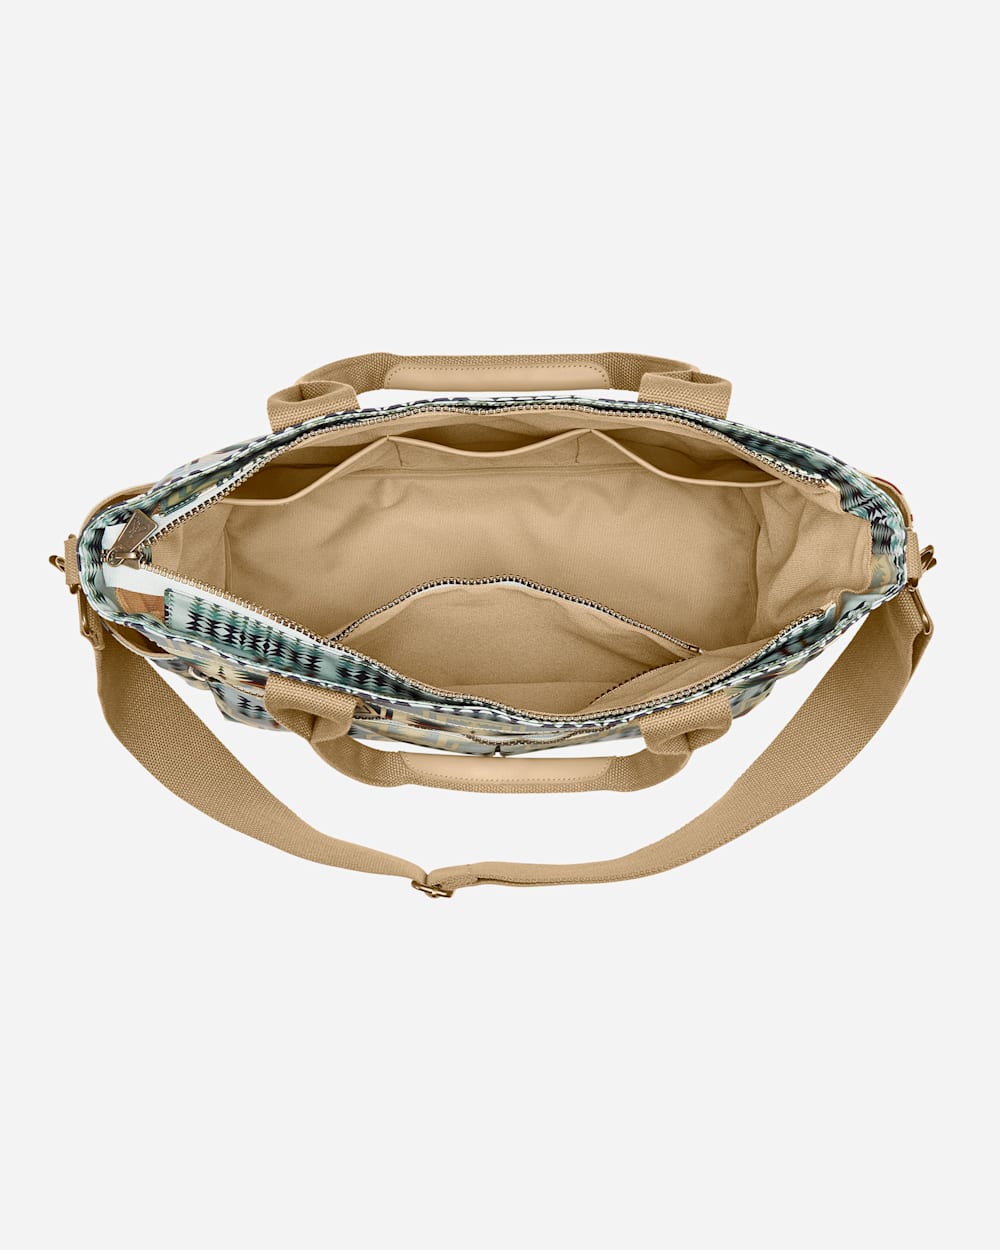 ALTERNATE VIEW OF HARDING CANOPY CANVAS SUPER TOTE IN AQUA image number 3